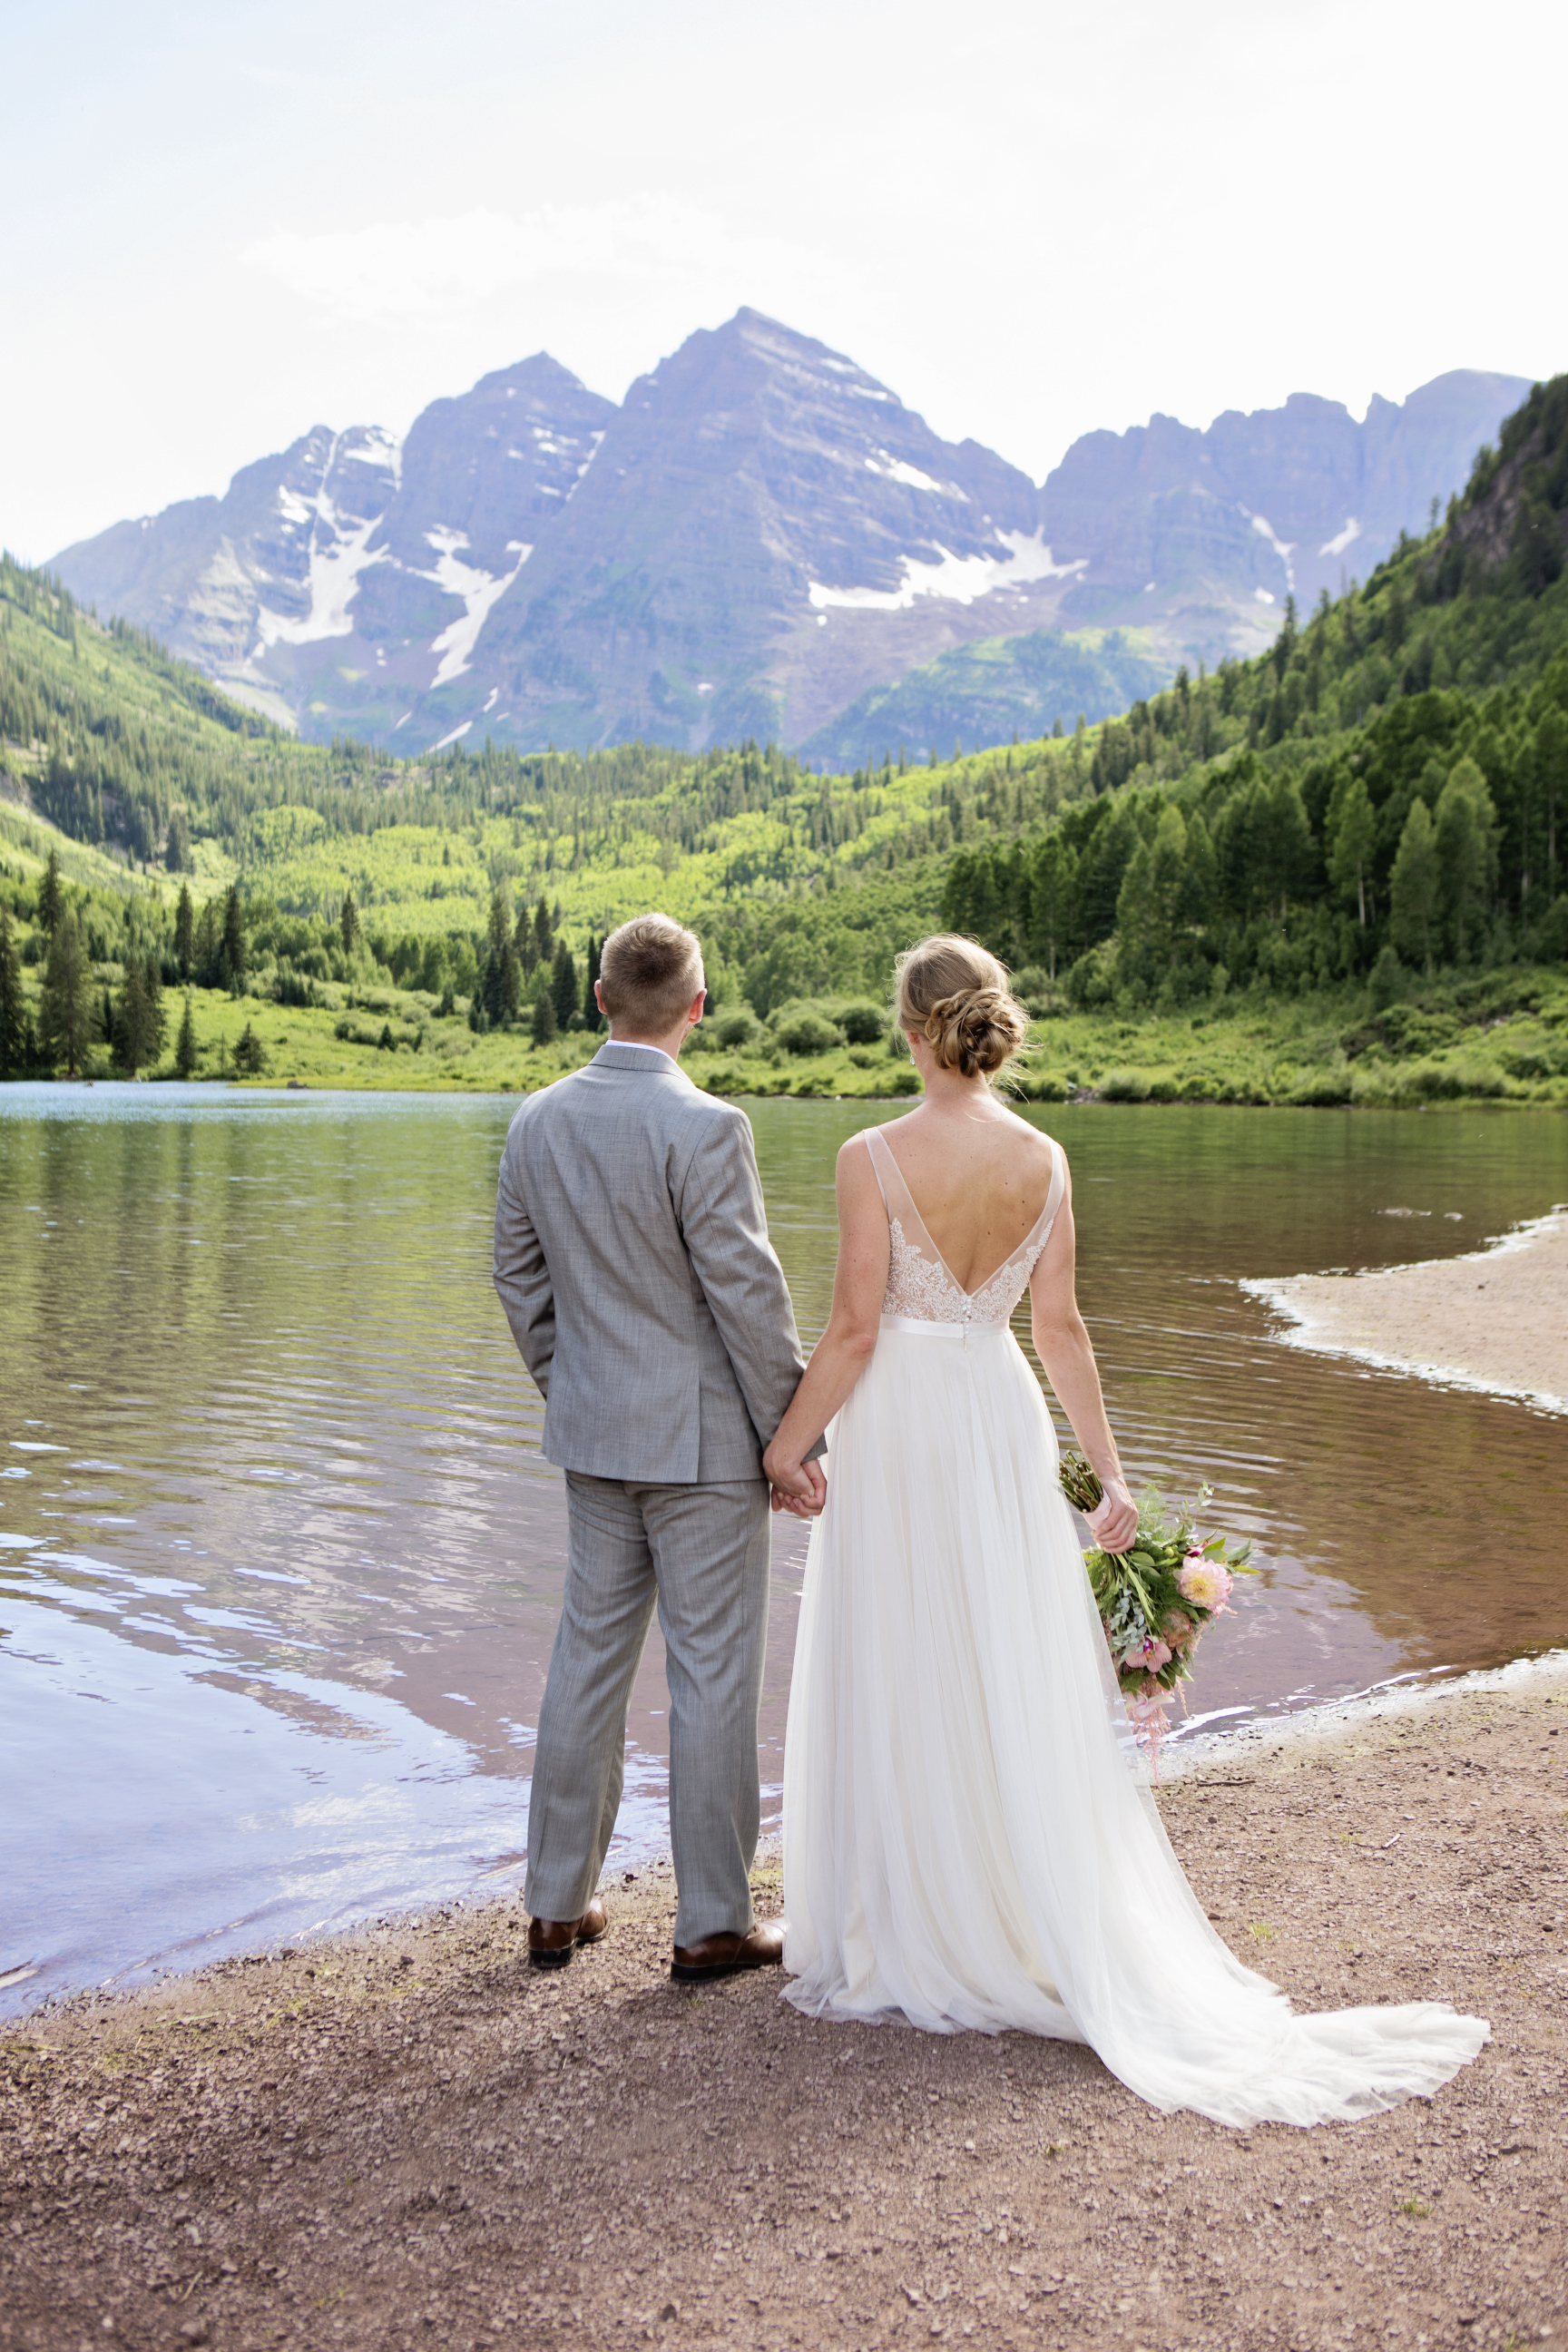 Weddings at the famous Maroon Bells in Aspen Colorado | Windfirm Photography